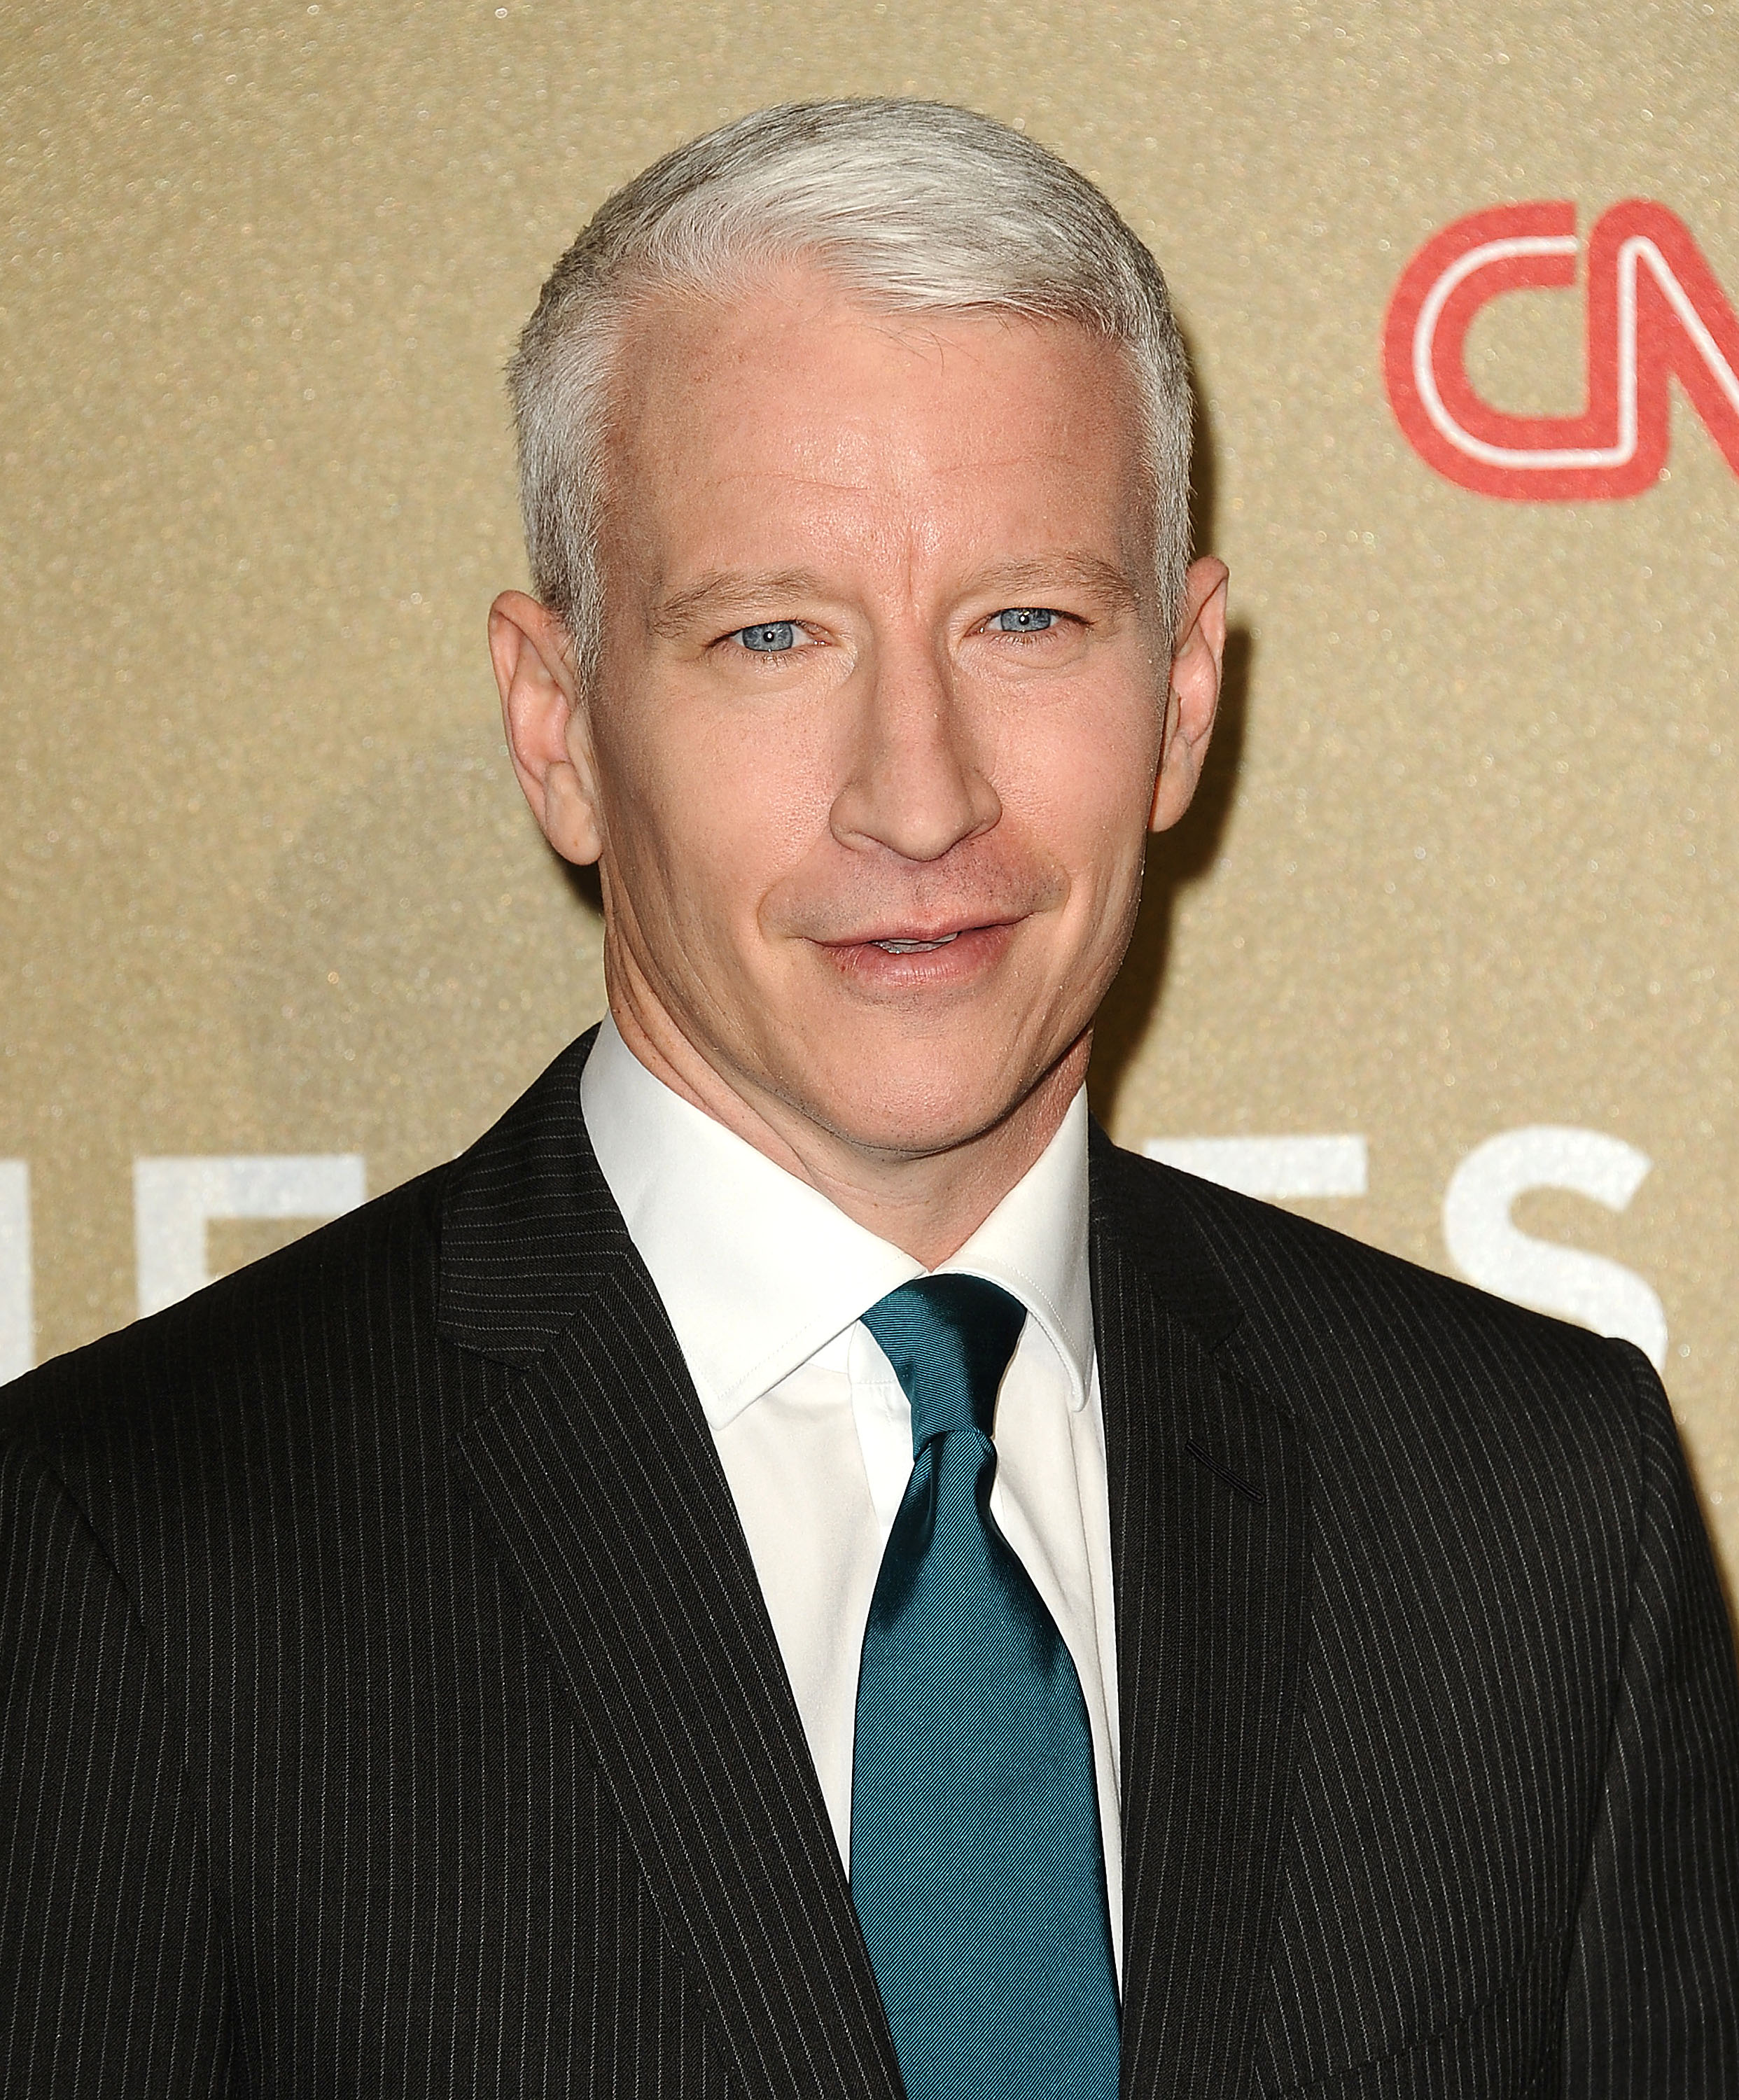 Anderson Cooper at the CNN Heroes: An All-Star Tribute in Los Angeles, California on December 2, 2012 | Source: Getty Images